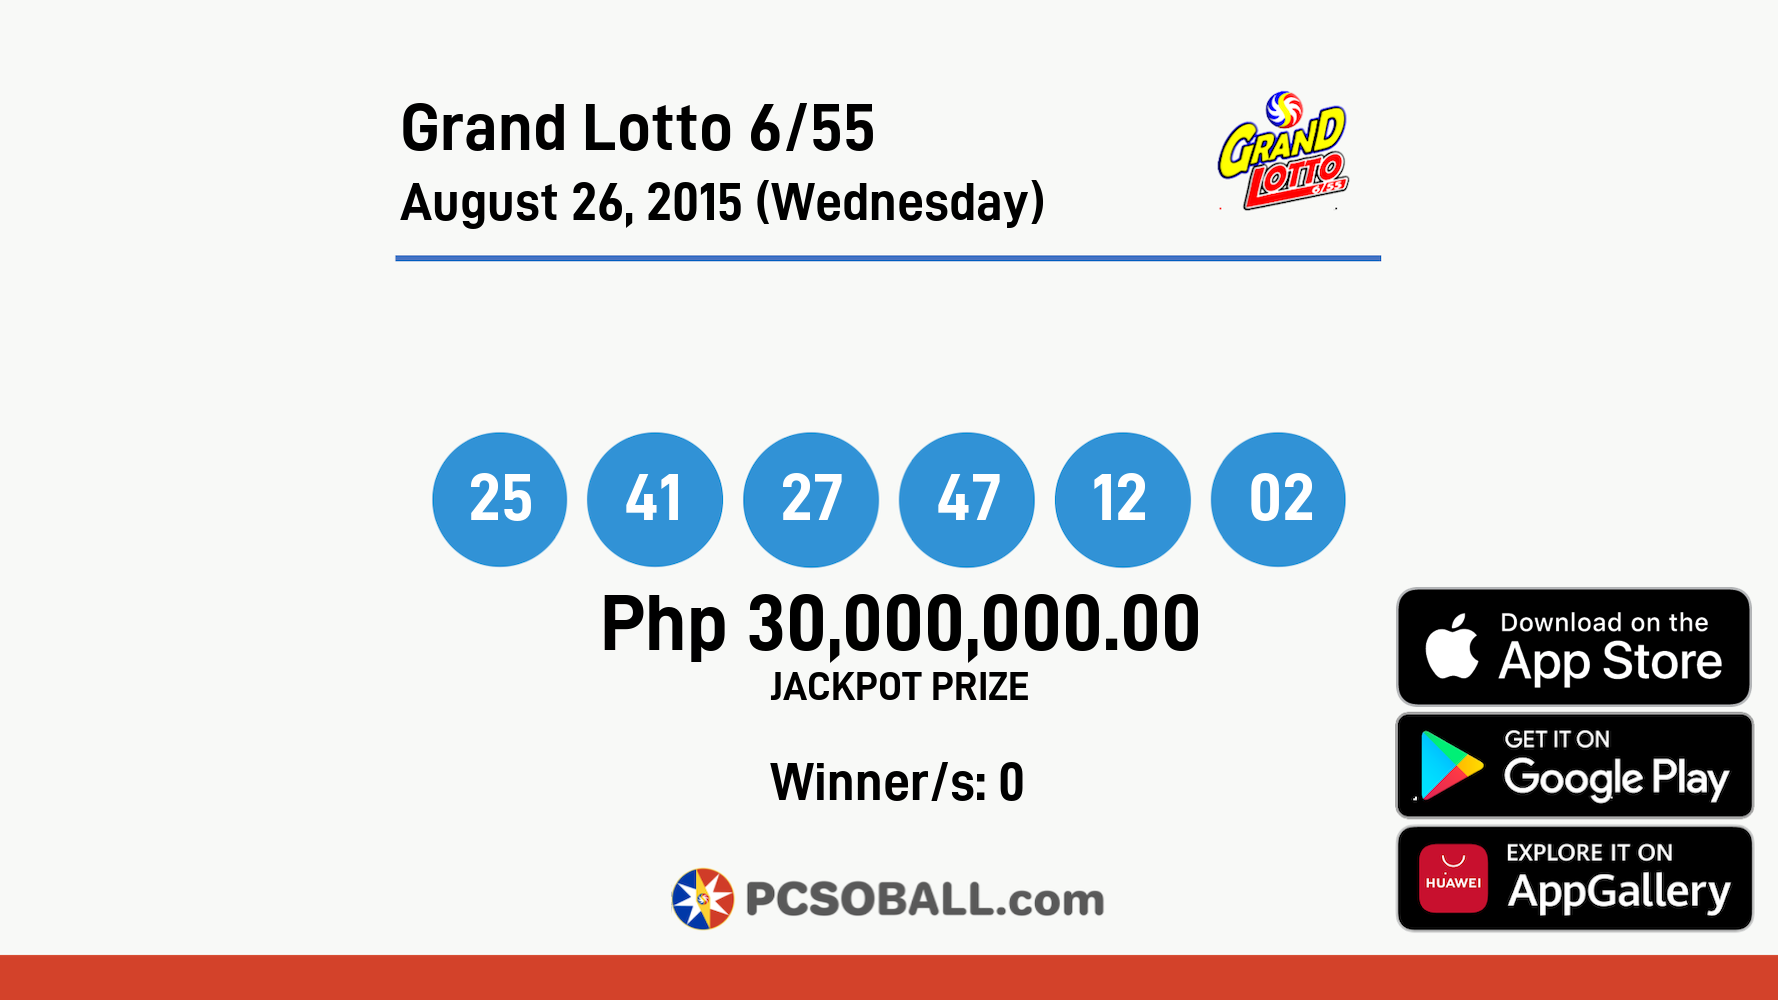 Grand Lotto 6/55 August 26, 2015 (Wednesday) Result